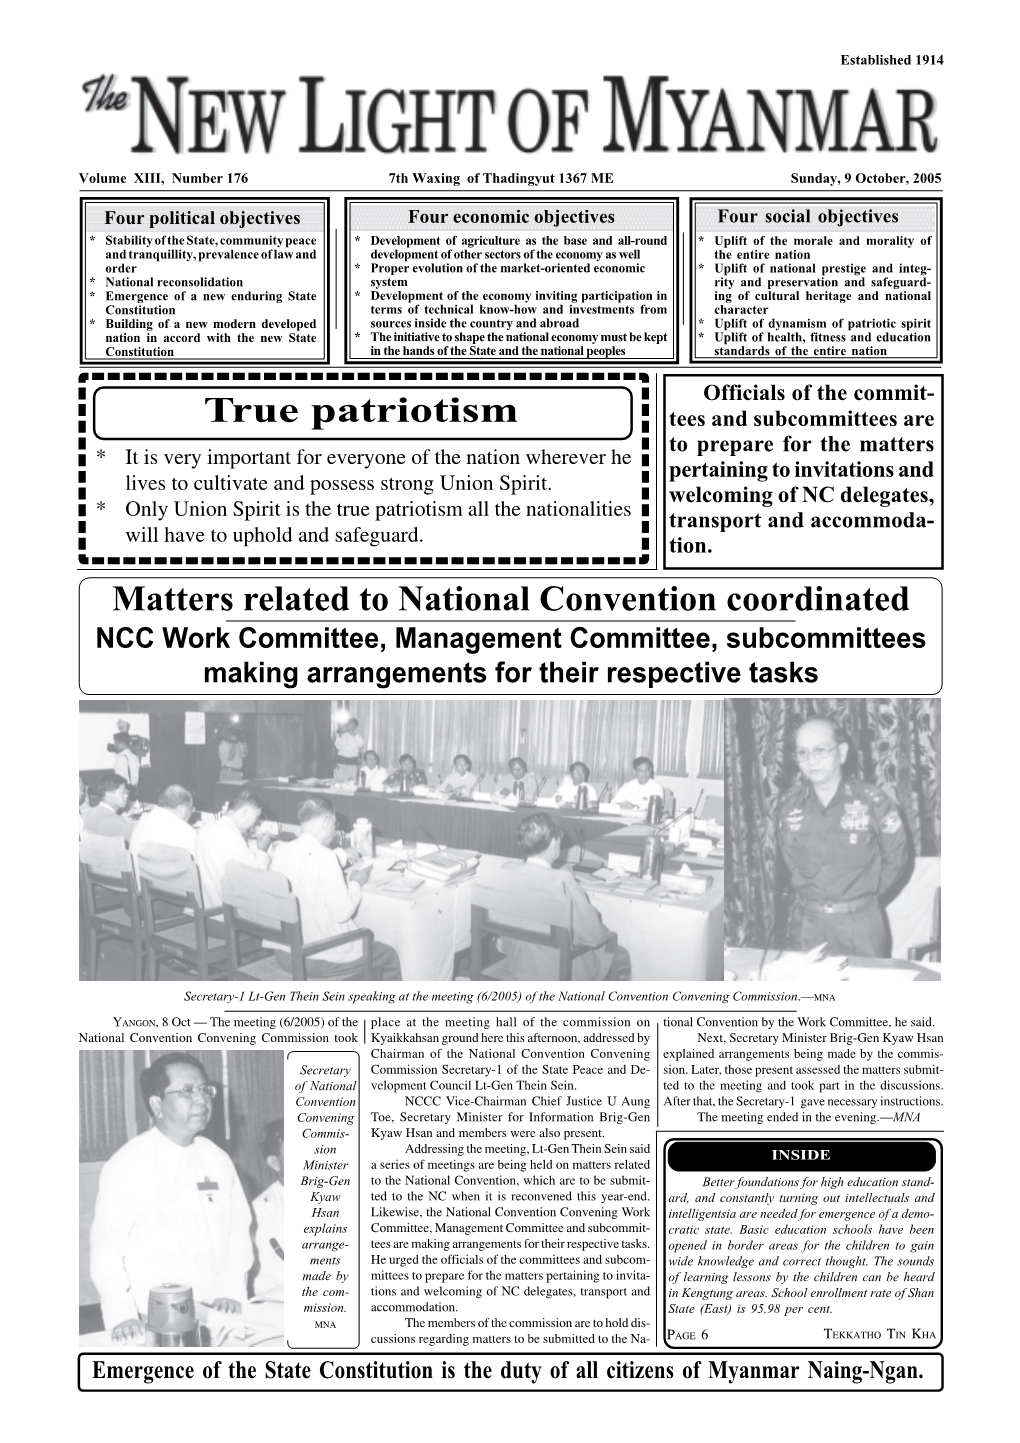 True Patriotism Matters Related to National Convention Coordinated